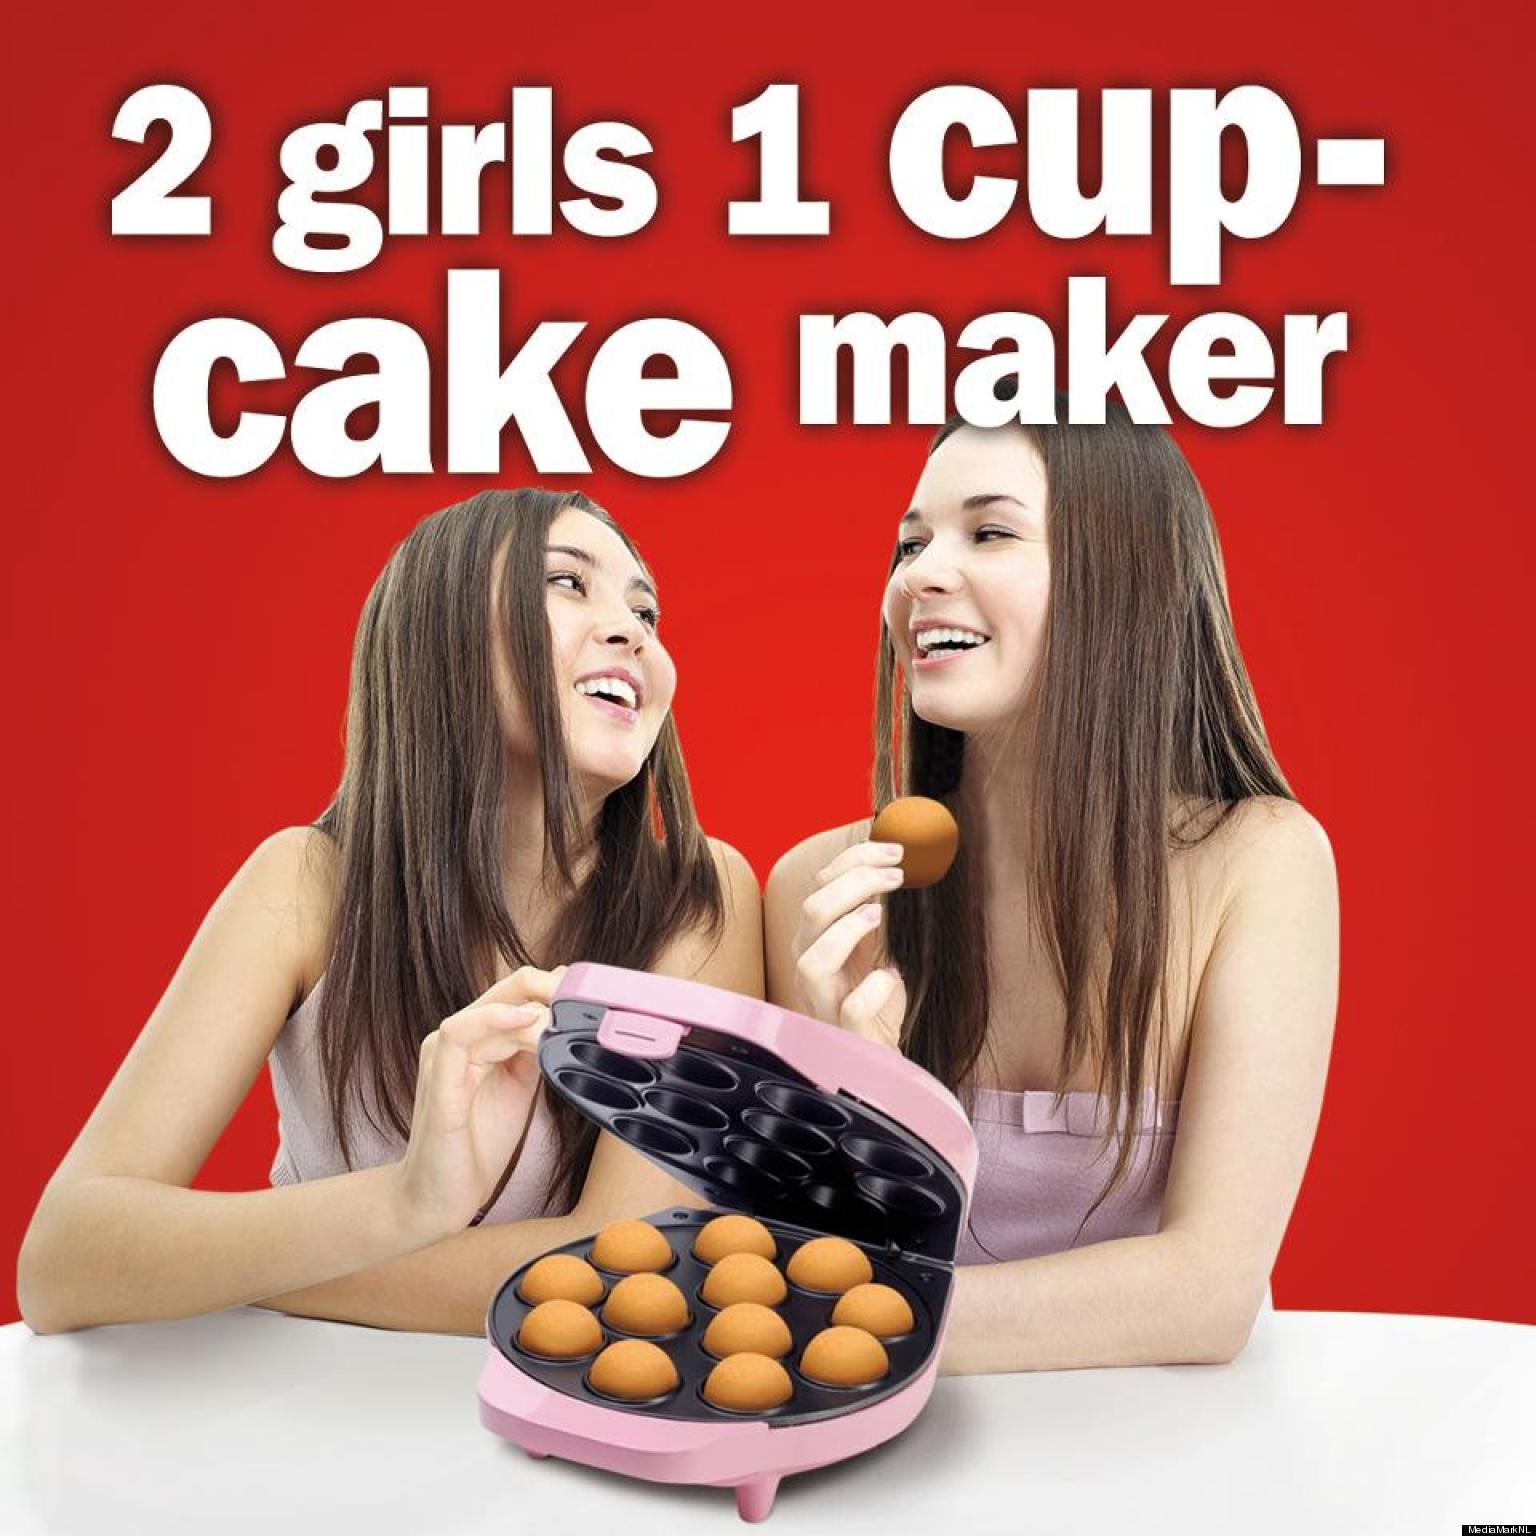 Girls one cup cup chicks - Real Naked Girls